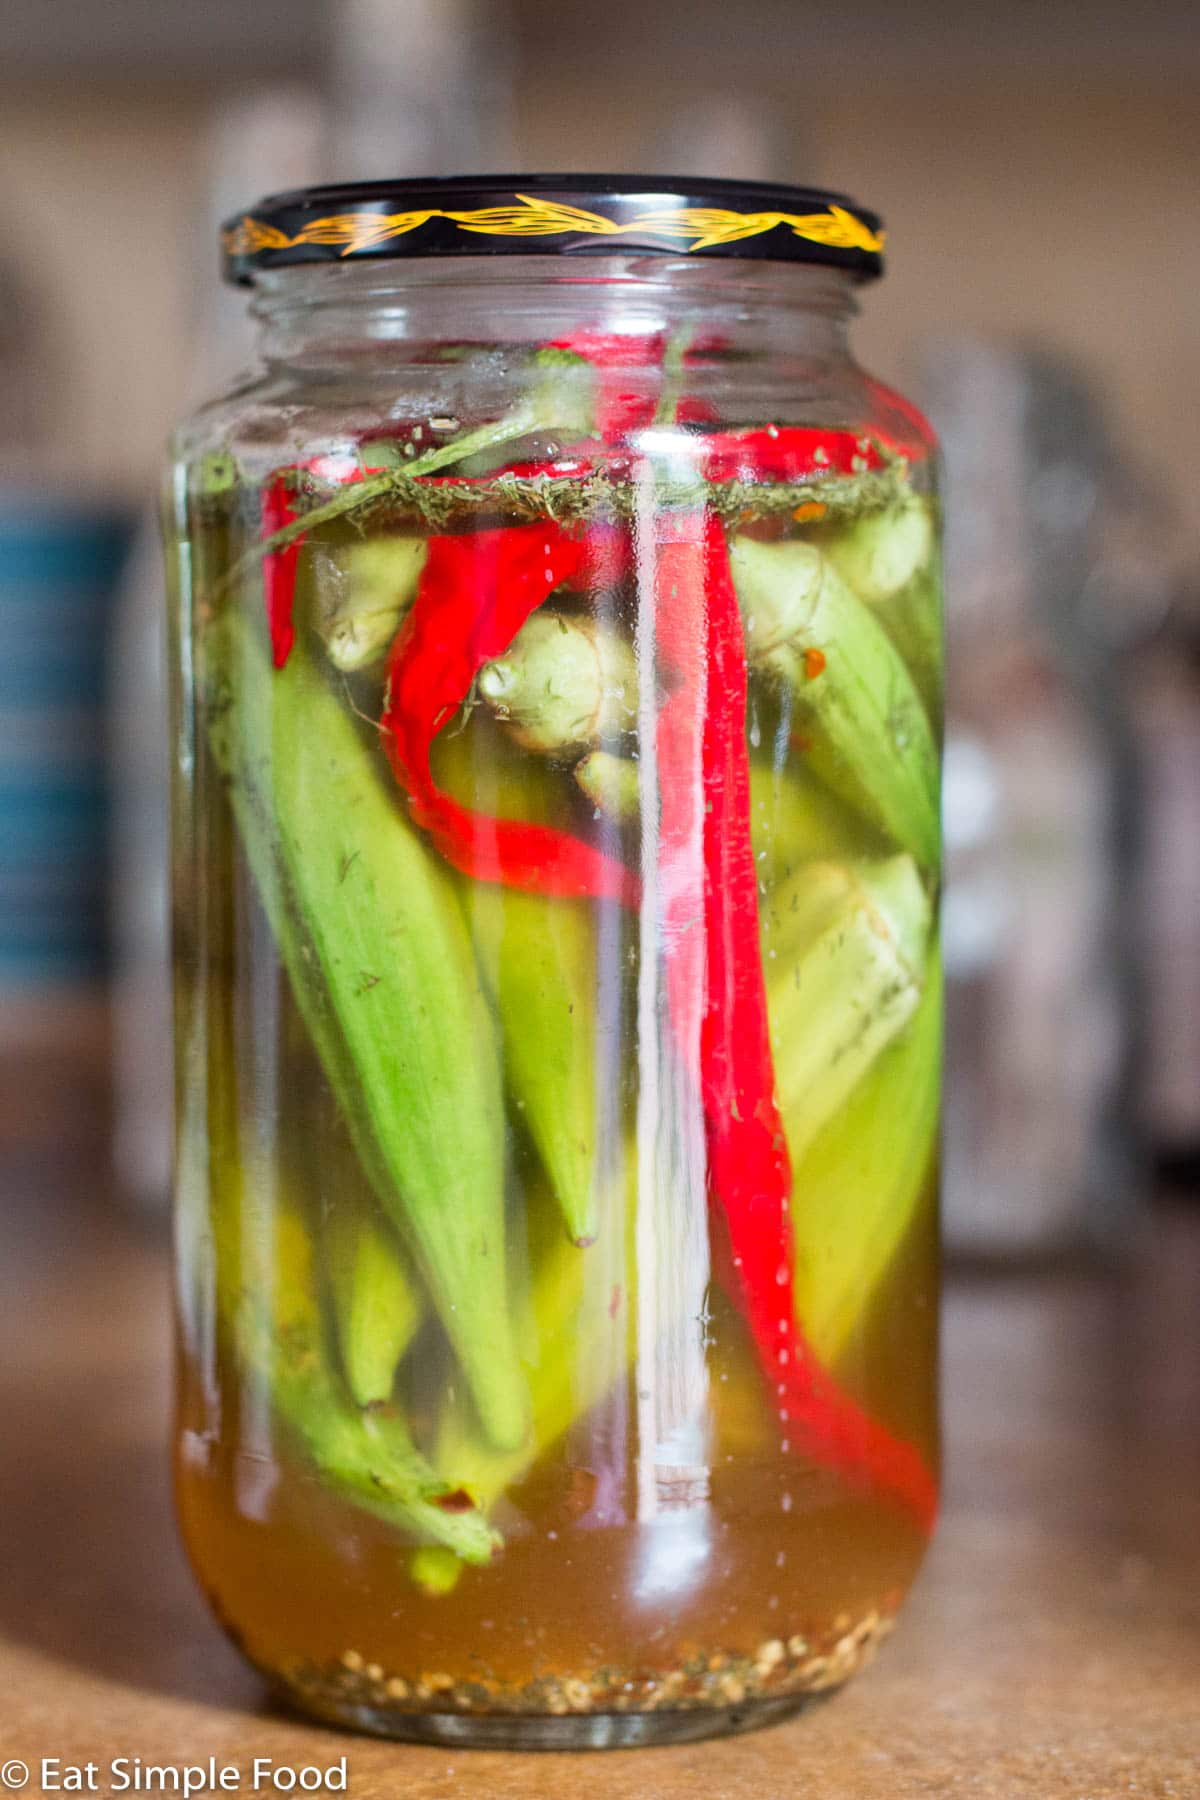 Pickled Red Chilli ( Whole)